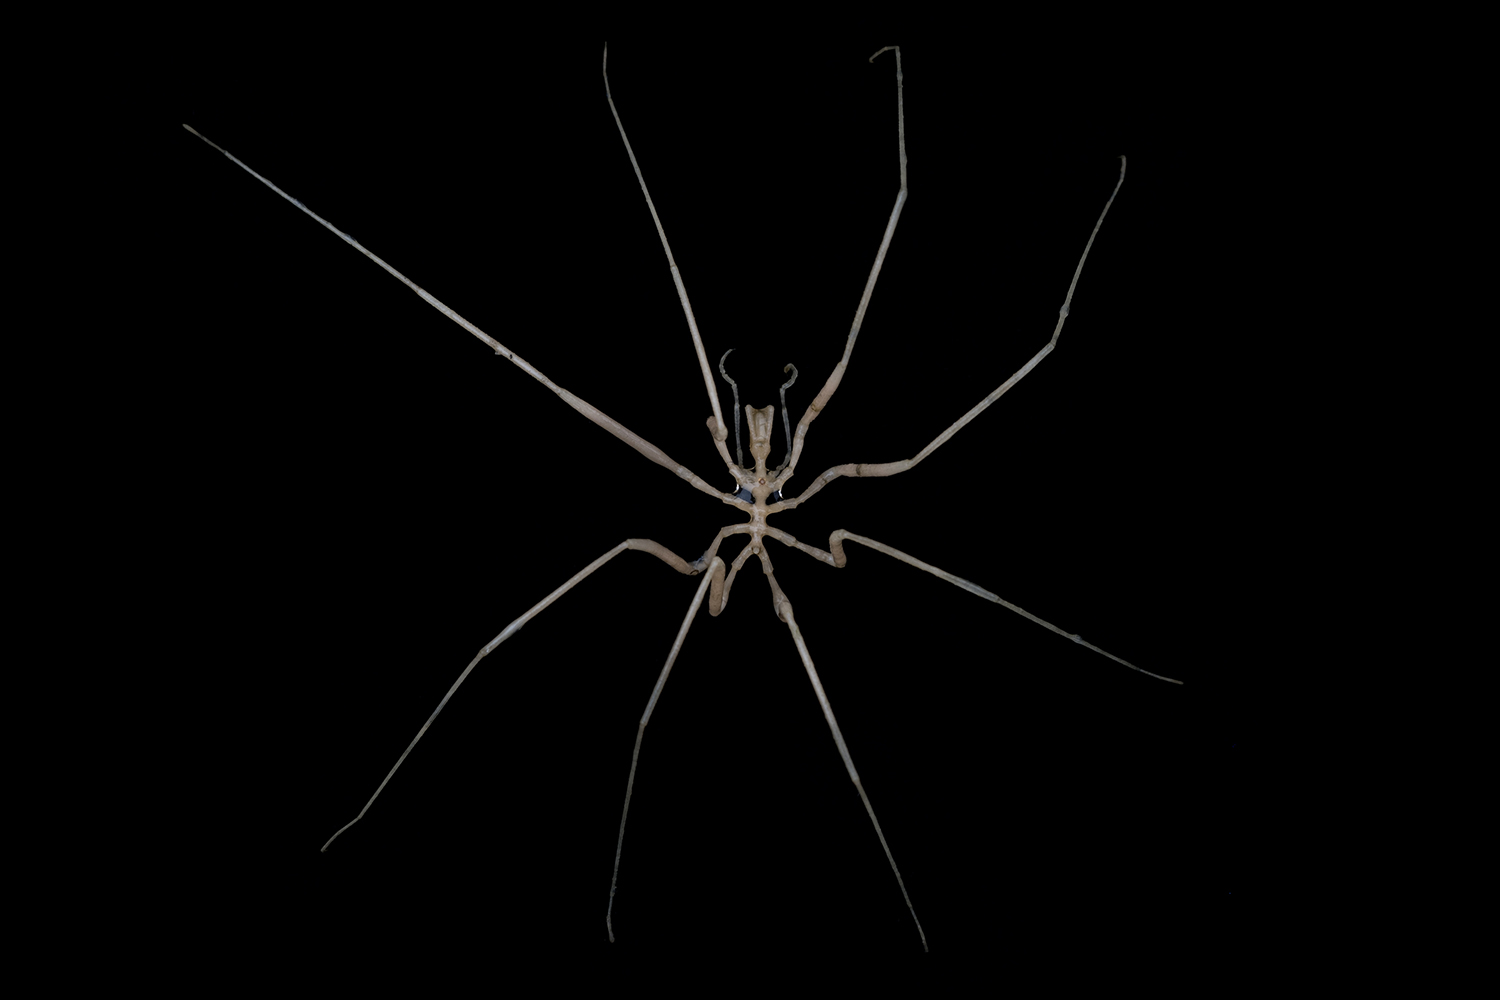 A pycnogonid sea spider from around 560 meters off Lecointe Island (Gerlache Strait, Antarctic Peninsula). Although this specimen spans approx. 6 cm, some Antarctic sea spider species can grow to the size of a dinner plate.